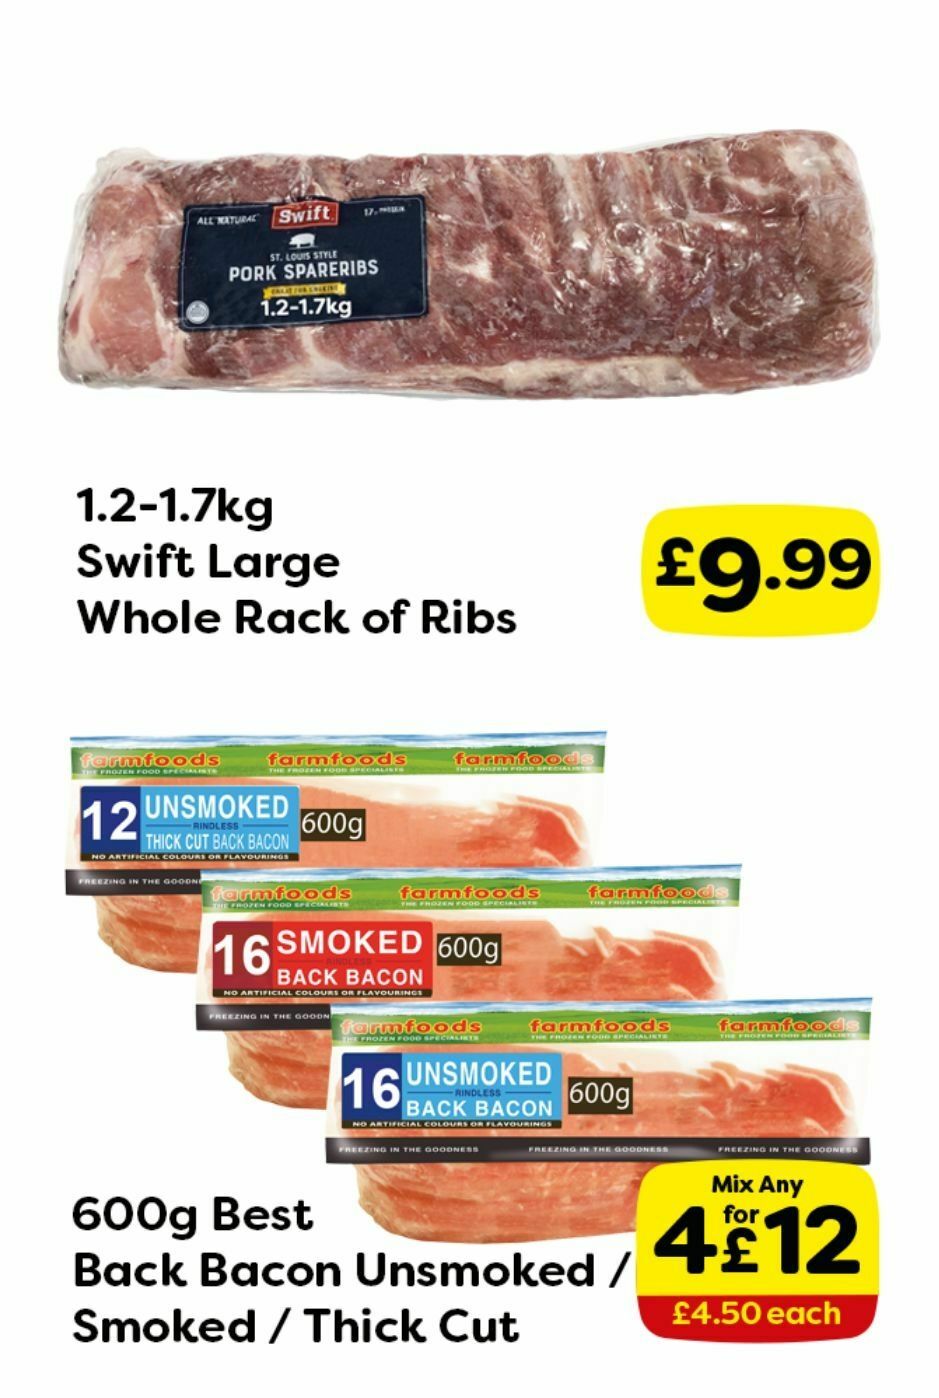 Farmfoods Offers from 5 March